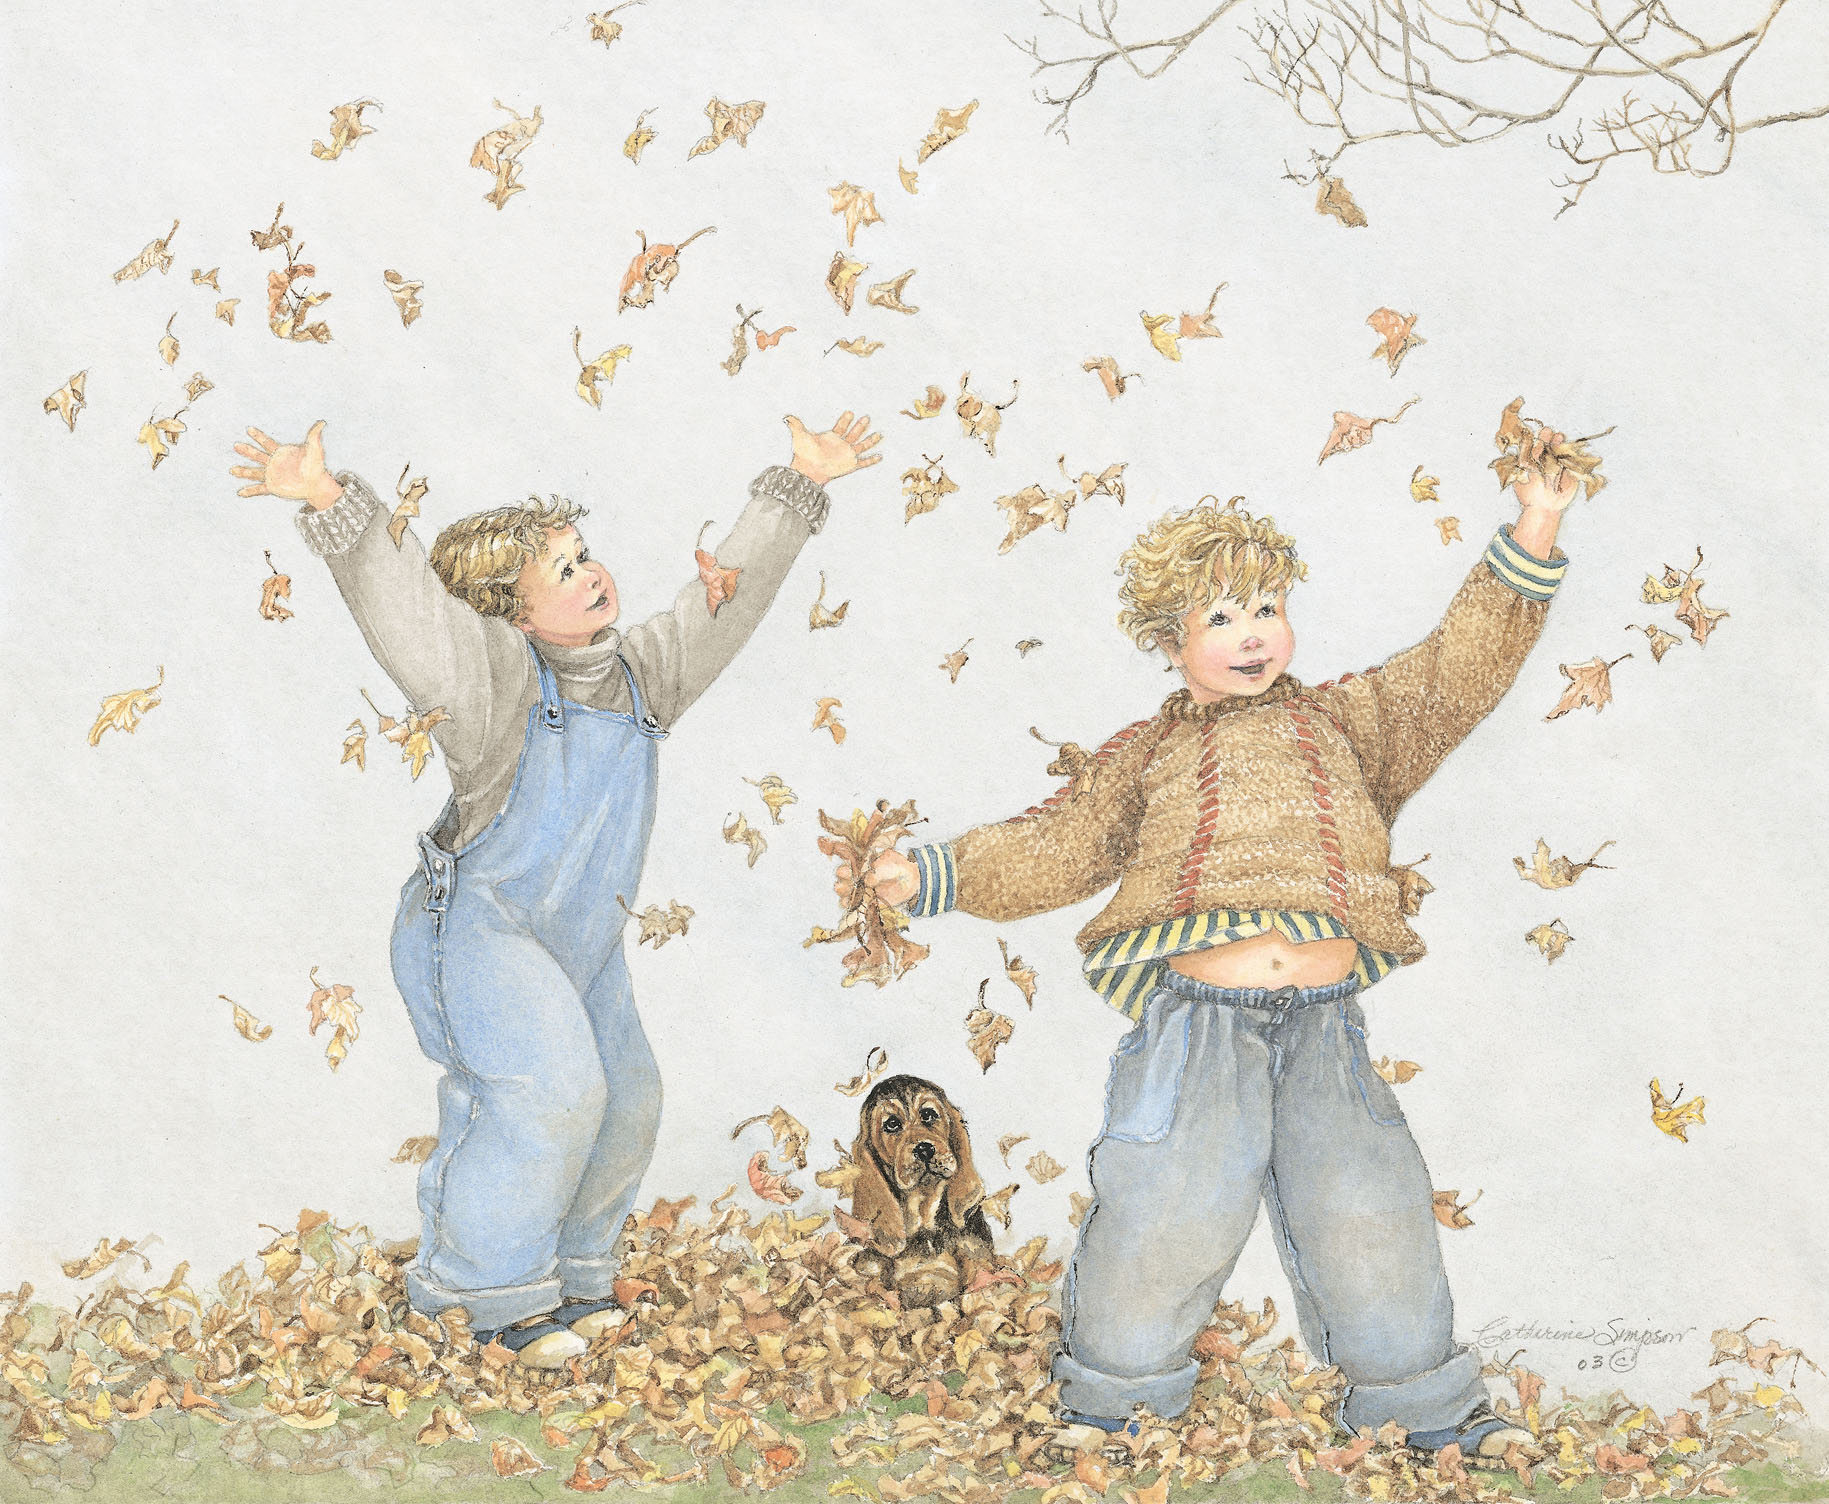 Autumn Leaves by Catherine Simpson